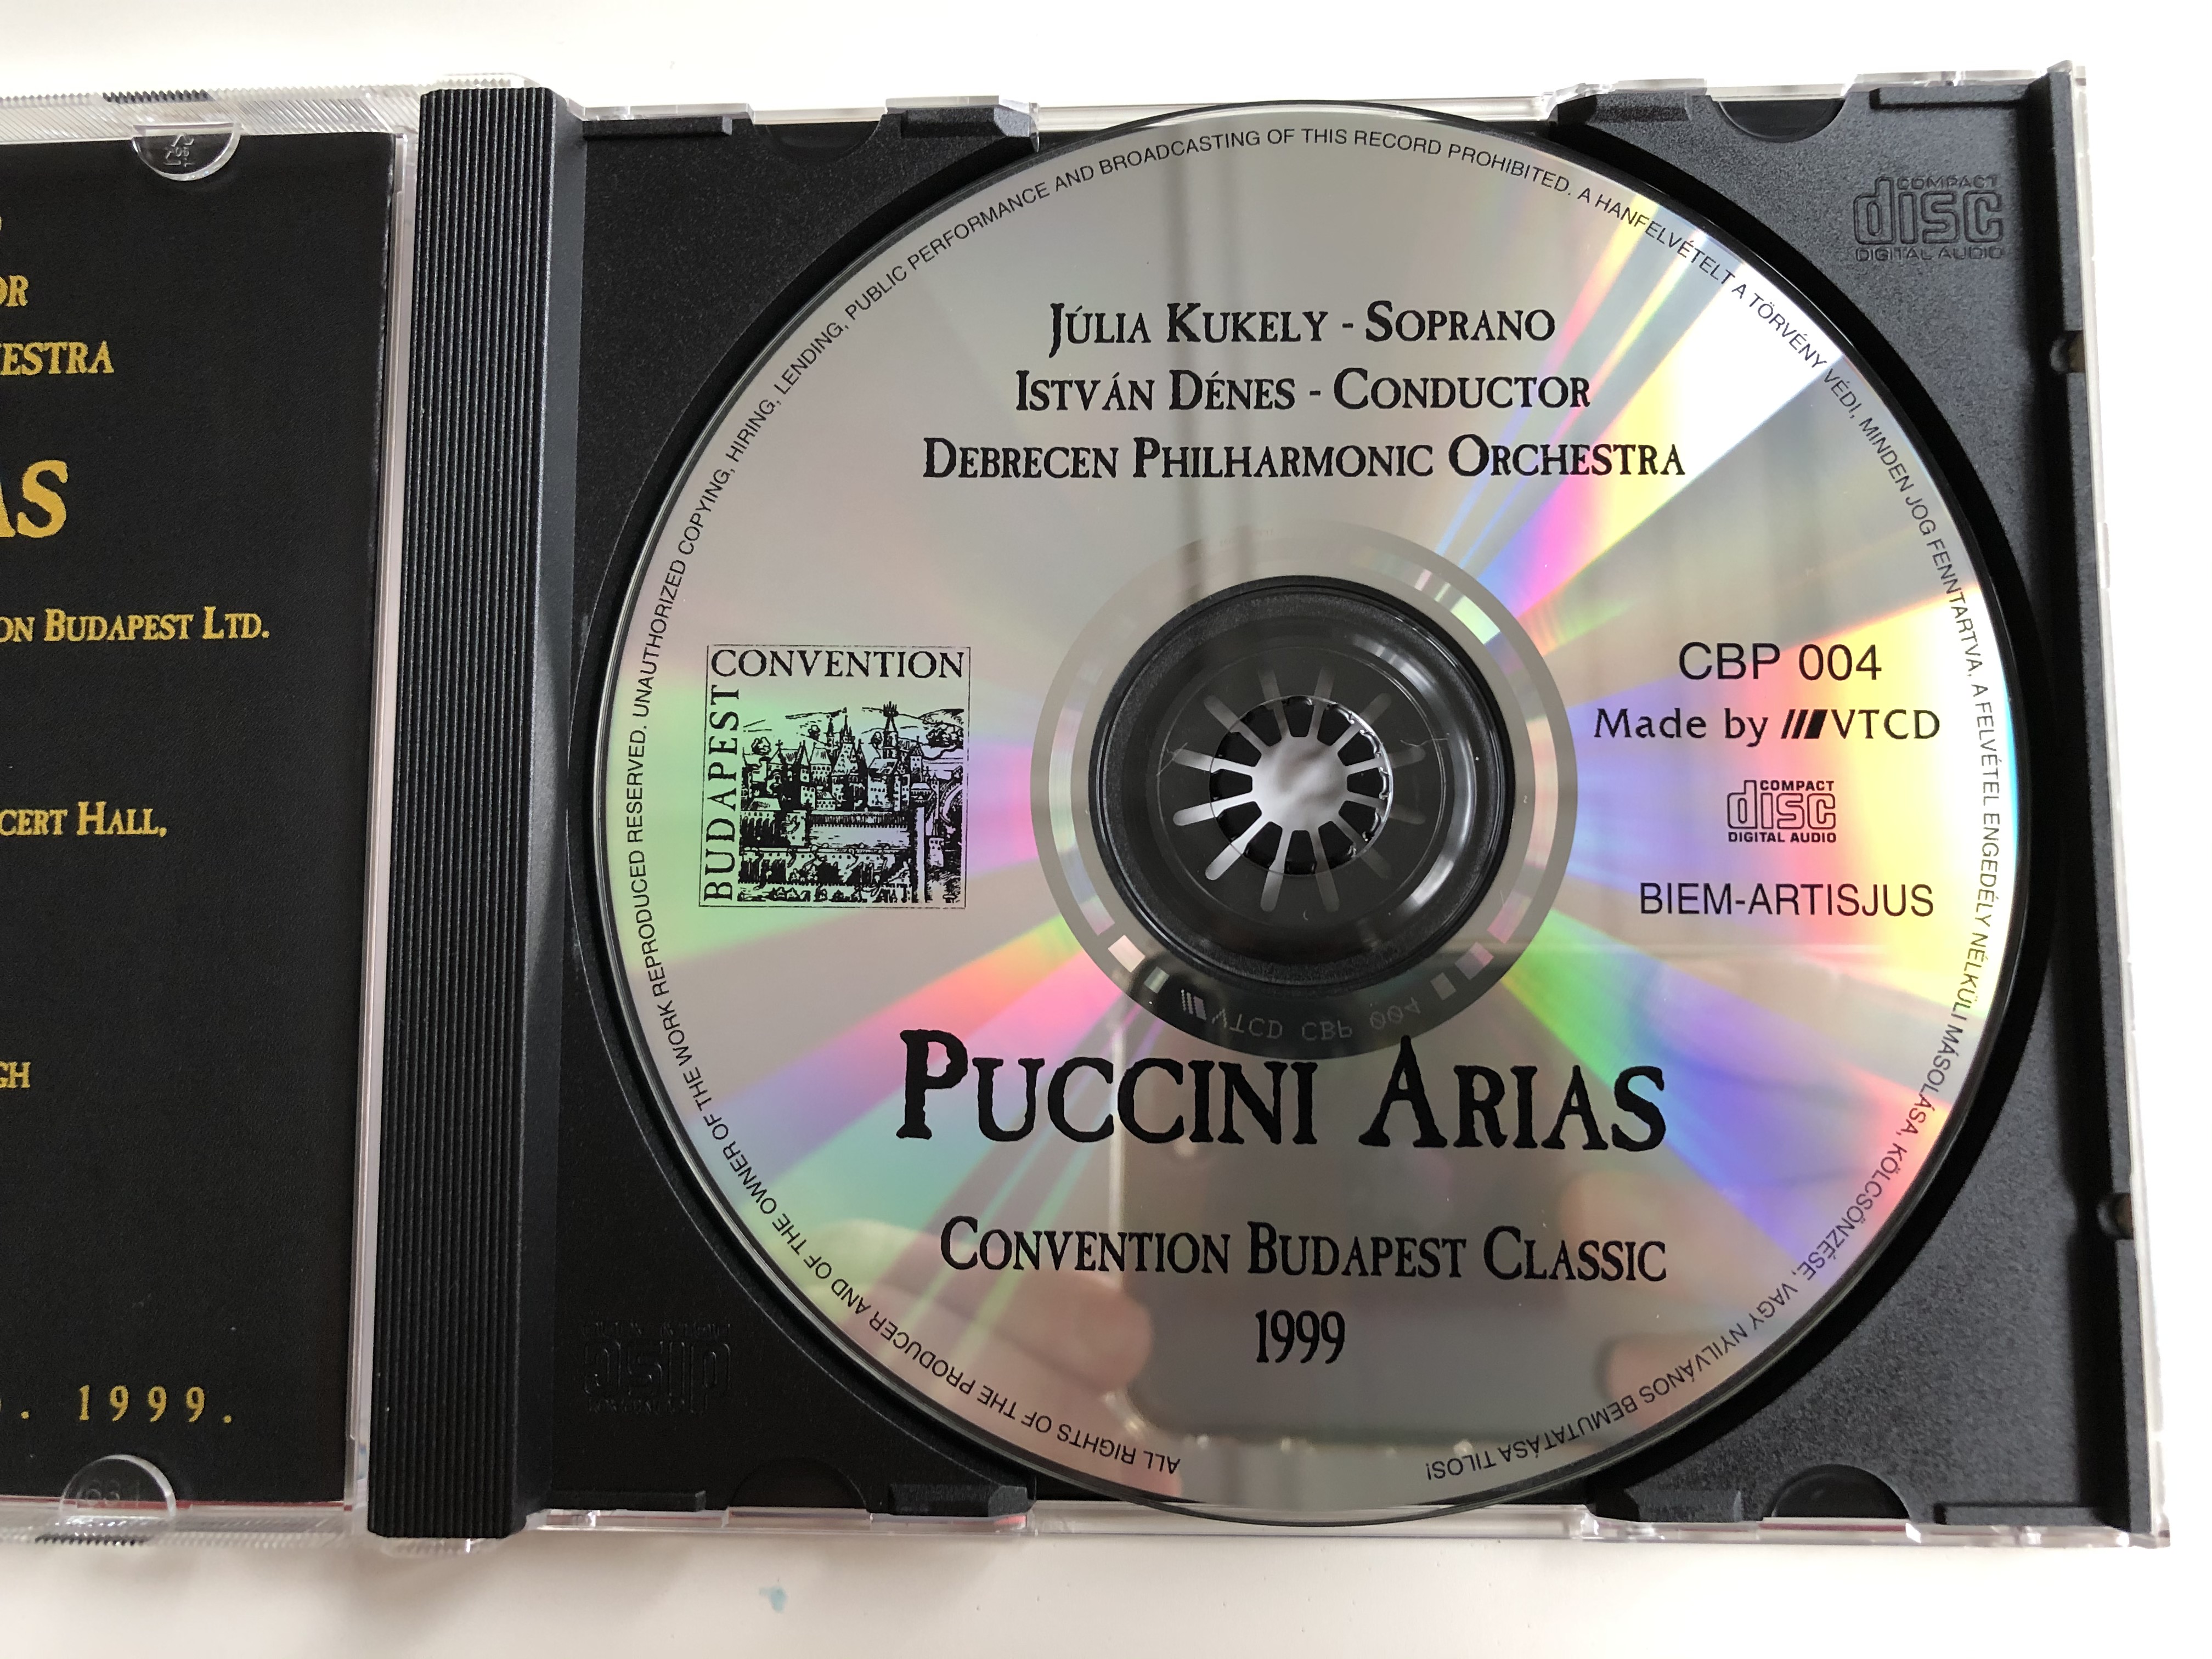 julia-kukely-puccini-arias-debrecen-philharmonic-orchestra-conducted-by-istvan-denes-convention-budapest-classic-audio-cd-1999-cbp-004-3-.jpg